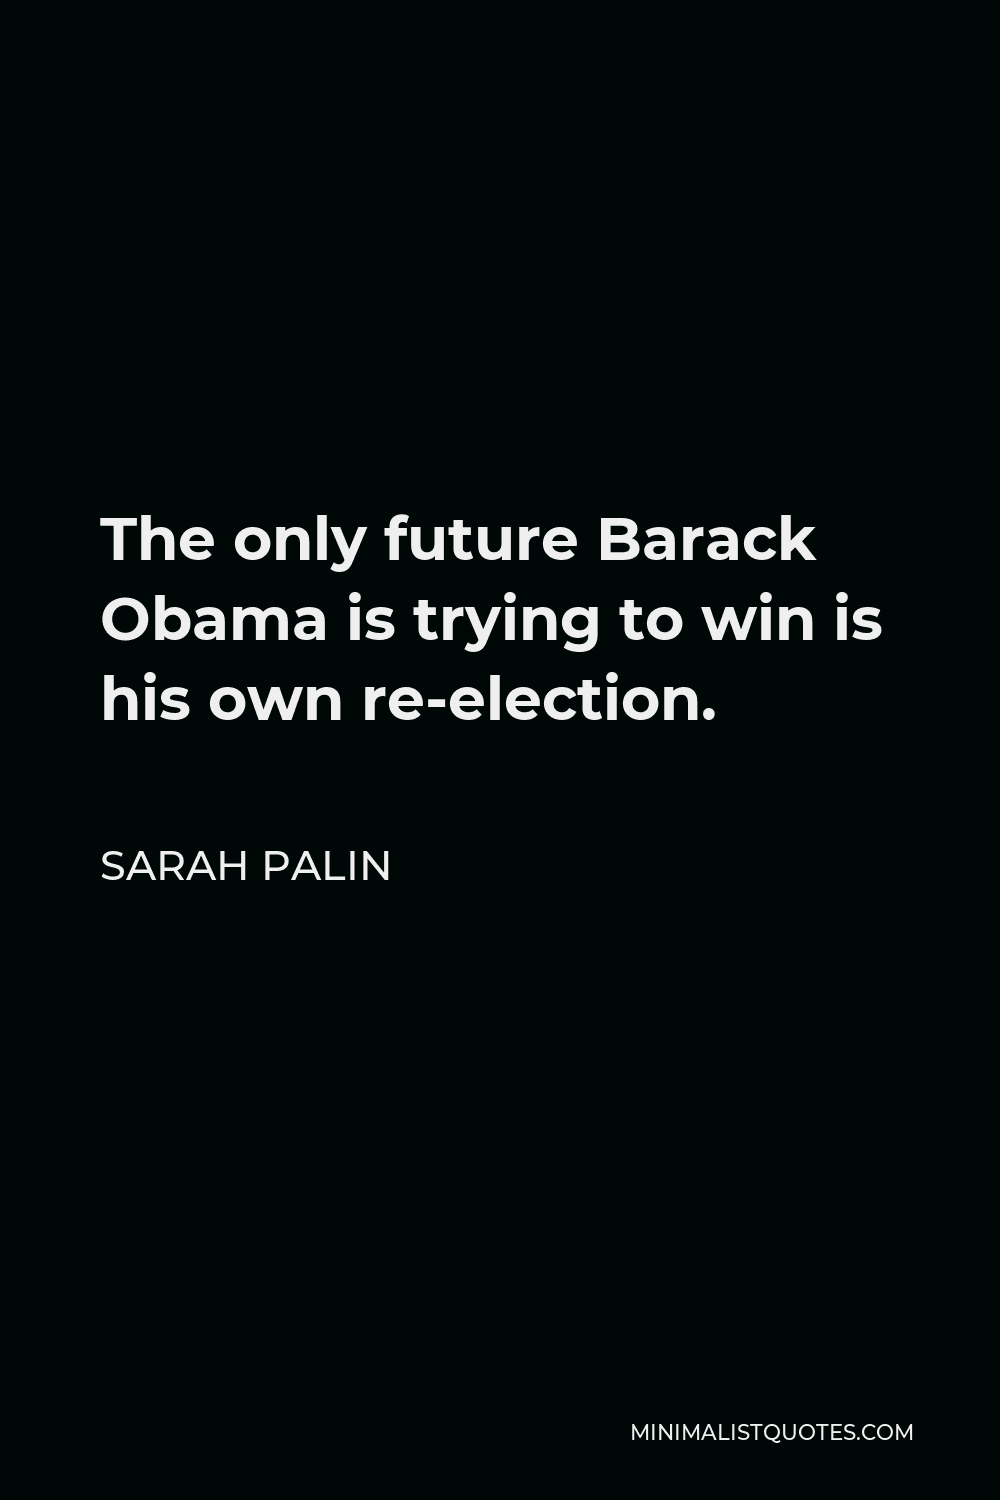 Sarah Palin Quote - The only future Barack Obama is trying to win is his own re-election.